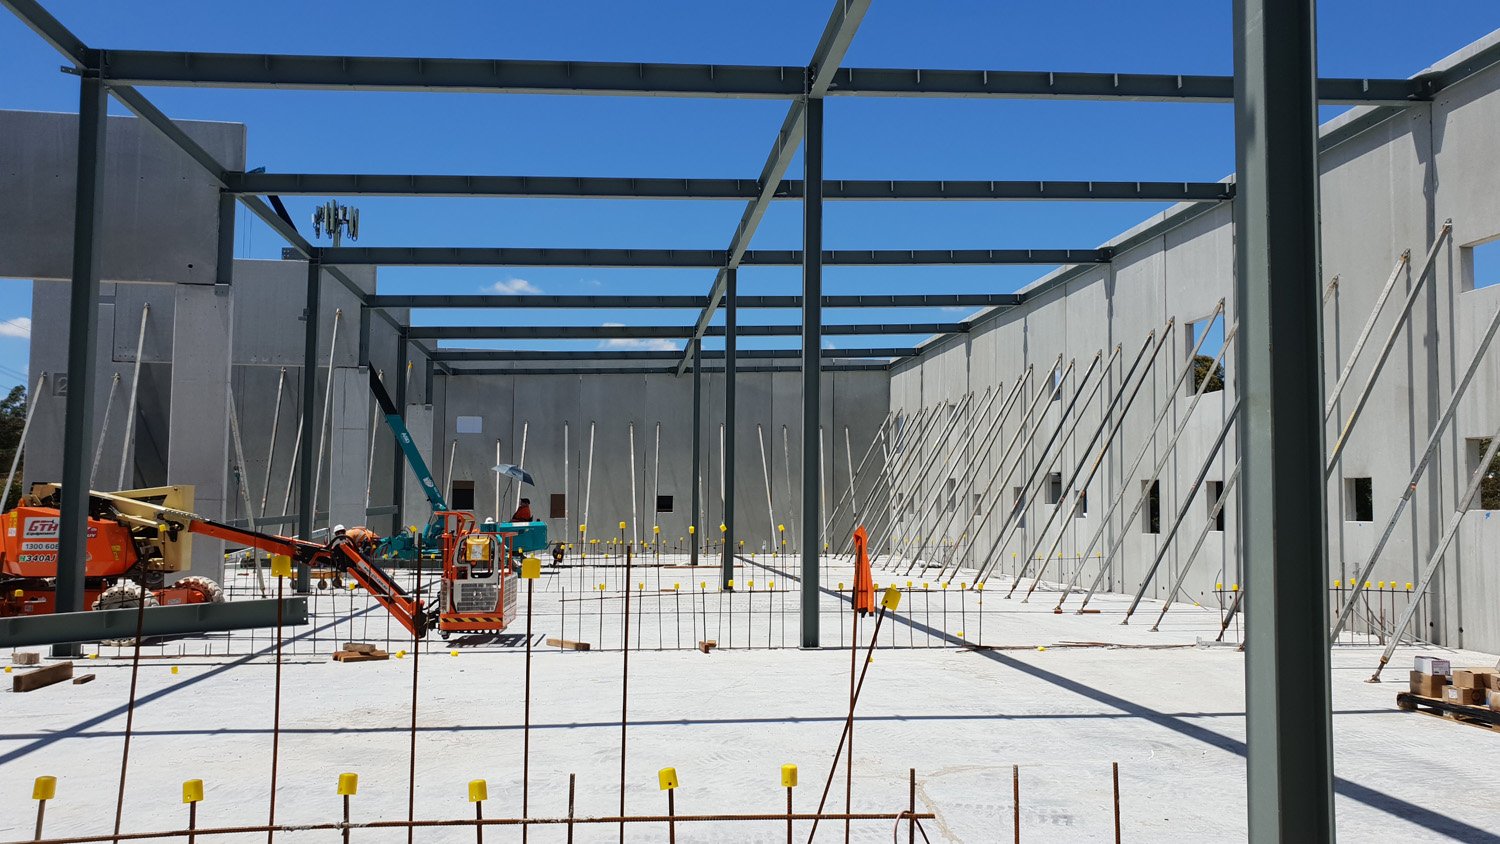 Structure in place - Precast panels laterally supported by steel roof framing | Joseph Alliker